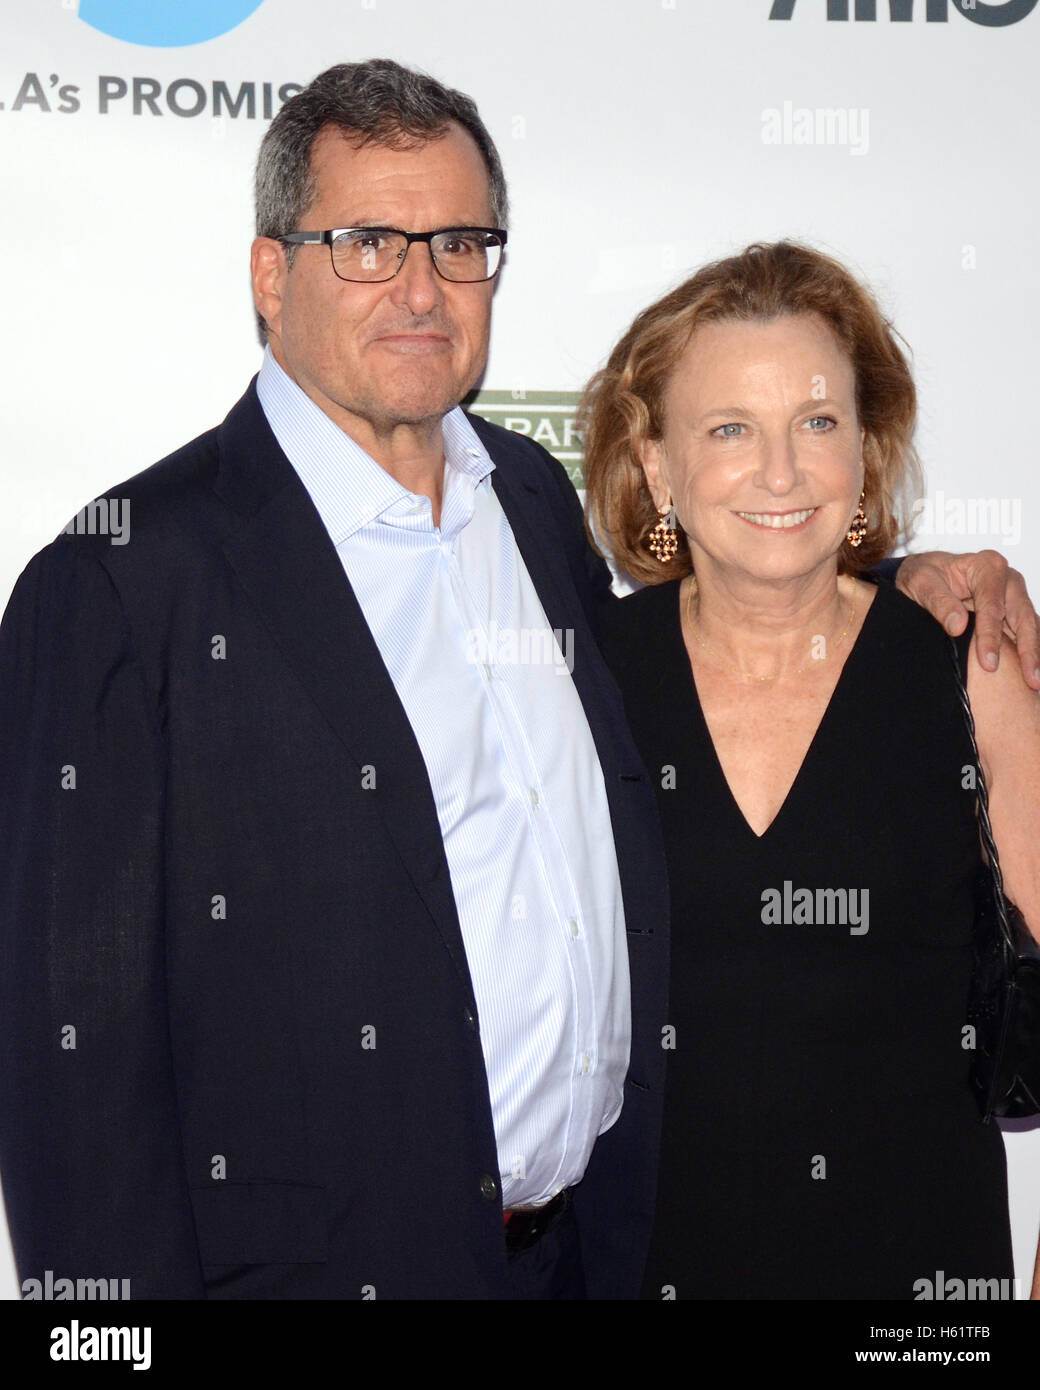 Peter Chernin and Megan Chernin attends the 2015 LA's Promise Gala held at Universal Studios Hollywood - Globe Theater on September 30, 2015 in Universal City, California. Stock Photo